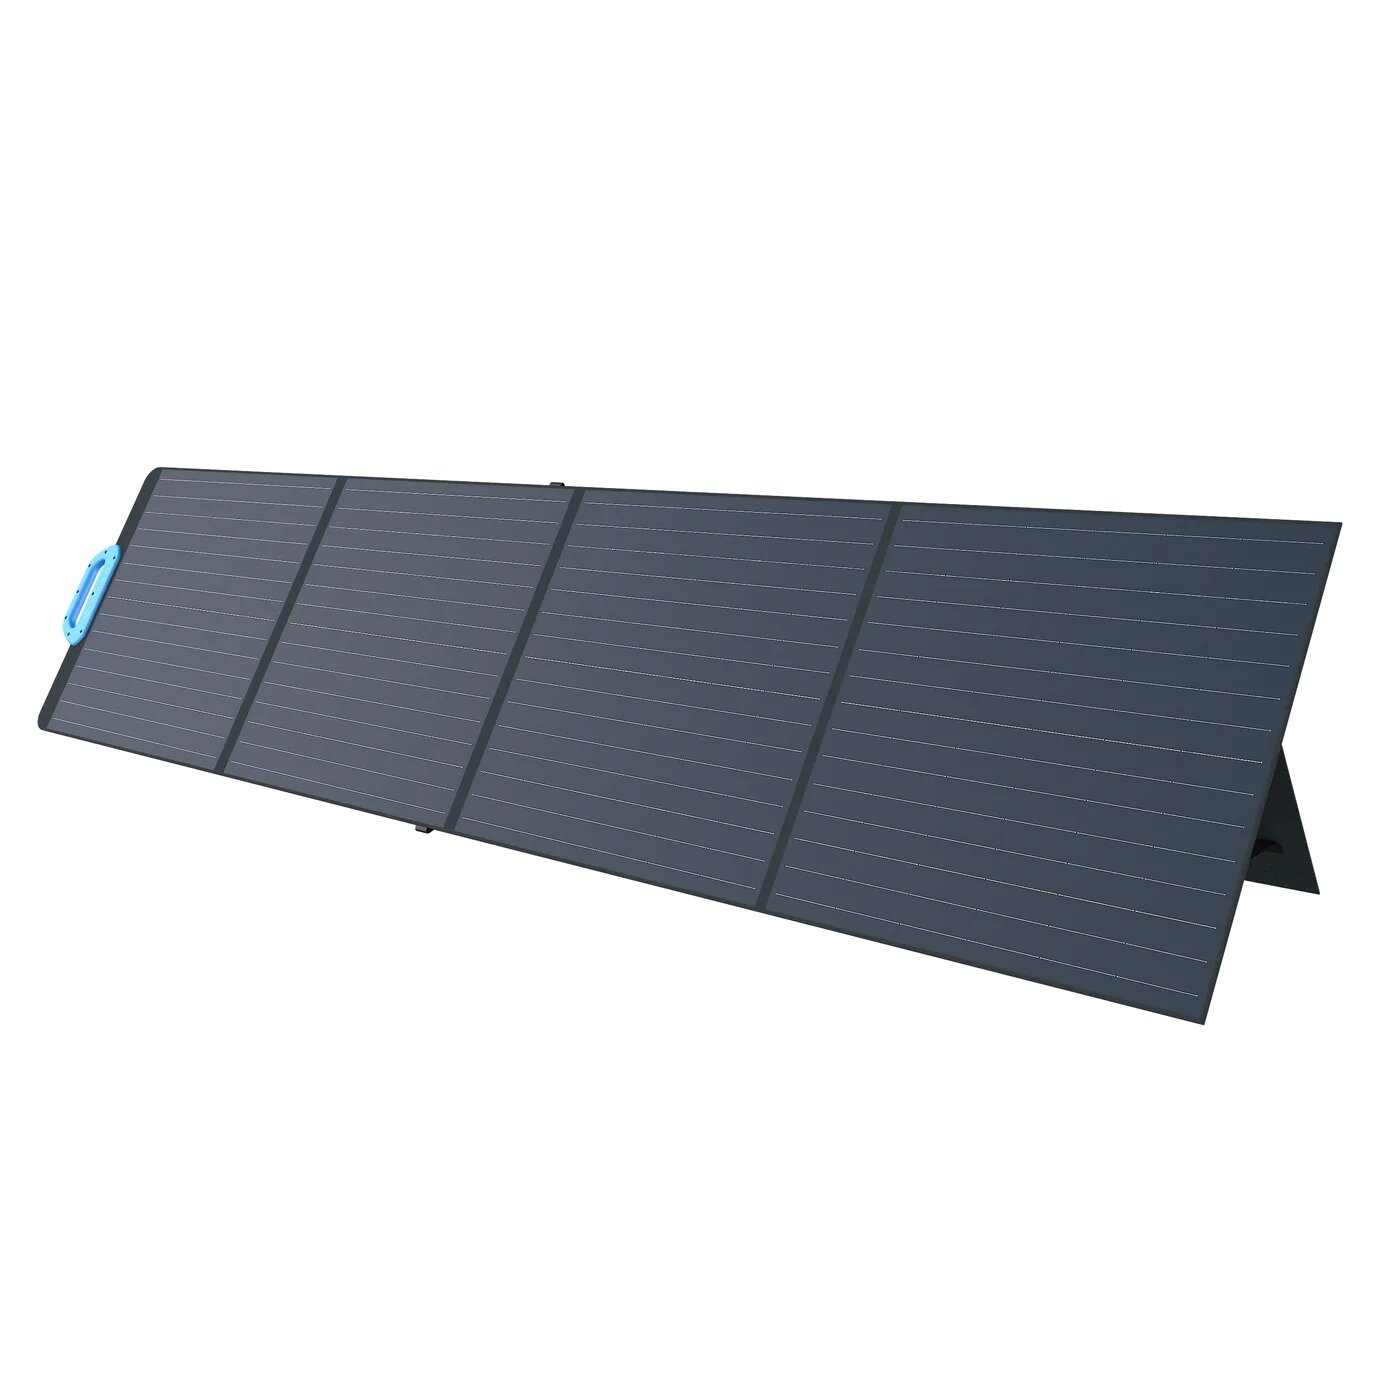 [EU Direct] BLUETTI PV200 200W Solar Panel Portable Foldable IP54 Waterproof High Conversion Efficiency Solar Charger With MCfour Connector